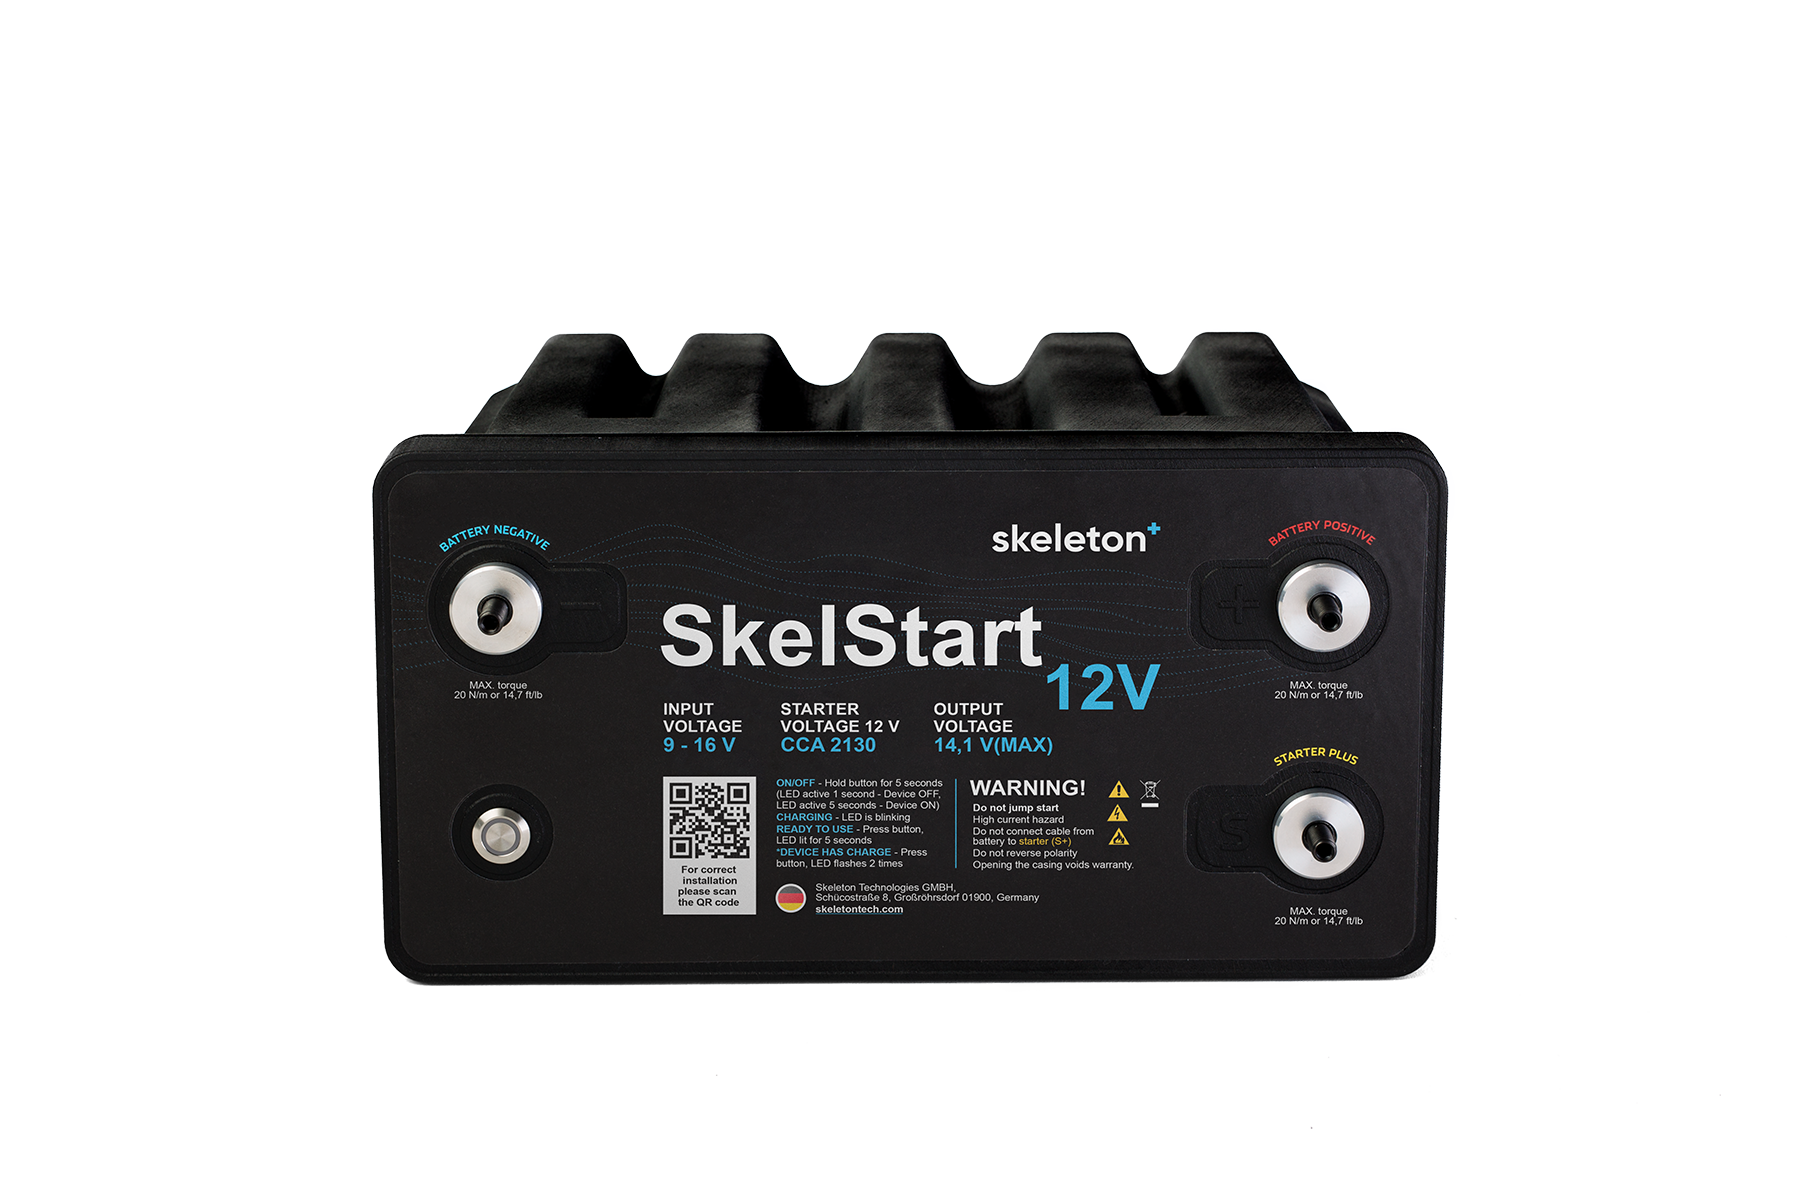 With a lifespan of up to 1 million cycles, SkelStarts can theoretically outlast the vehicles they serve.